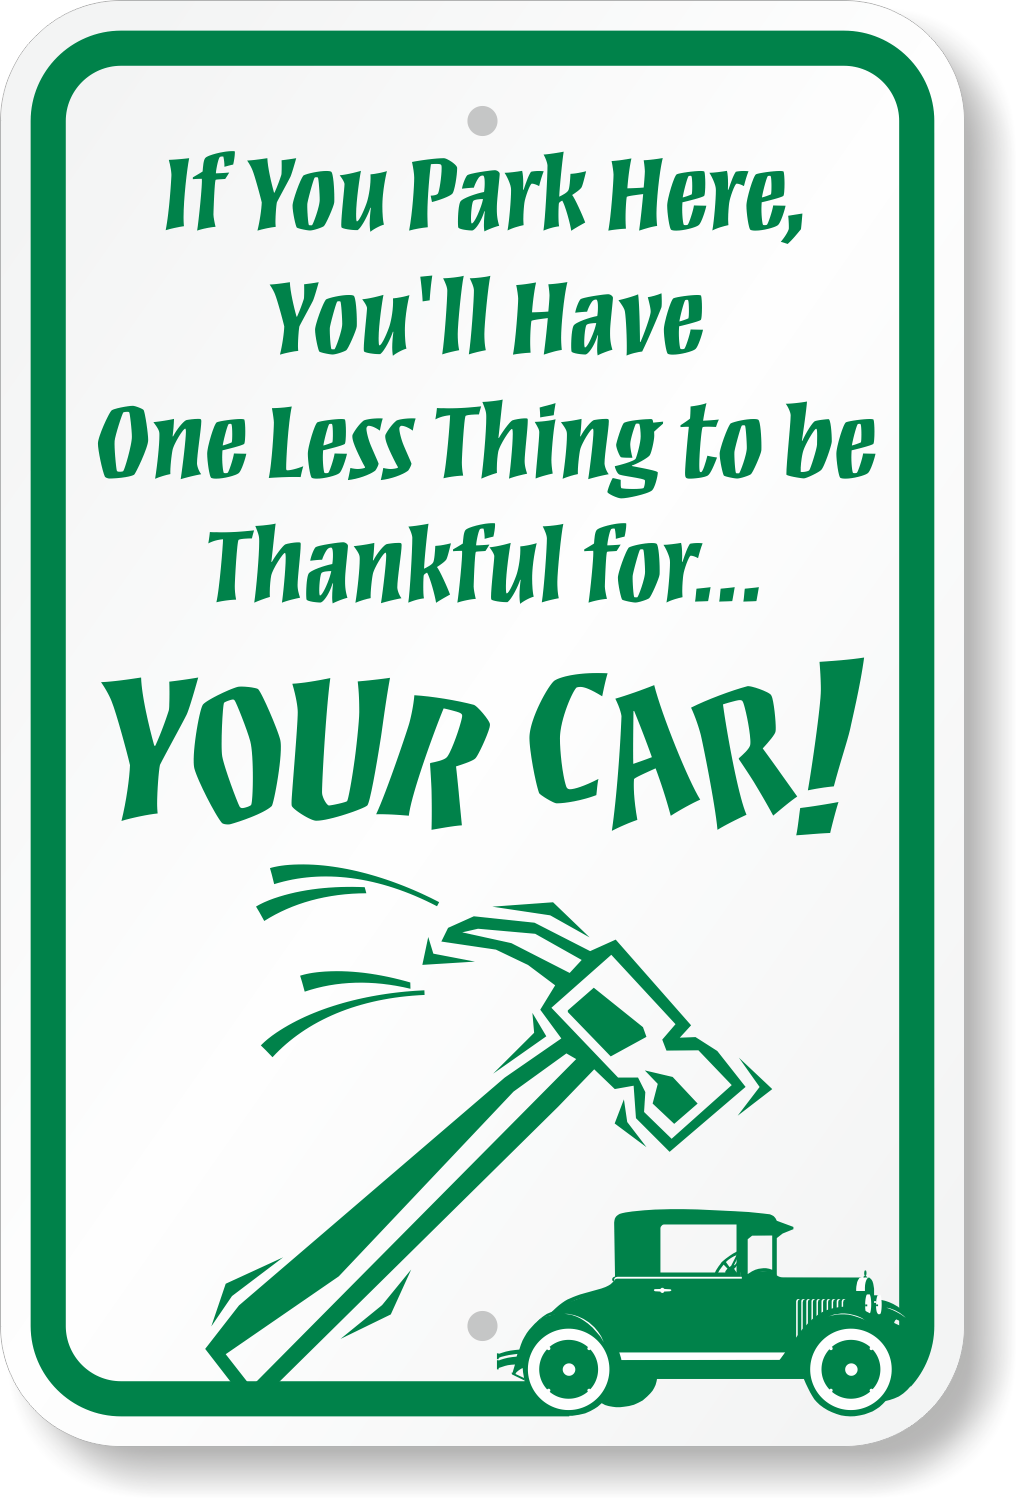 Details about   Cardinal Funny Parking OnlyNovelty Sign8x12 Inches4 corner holes